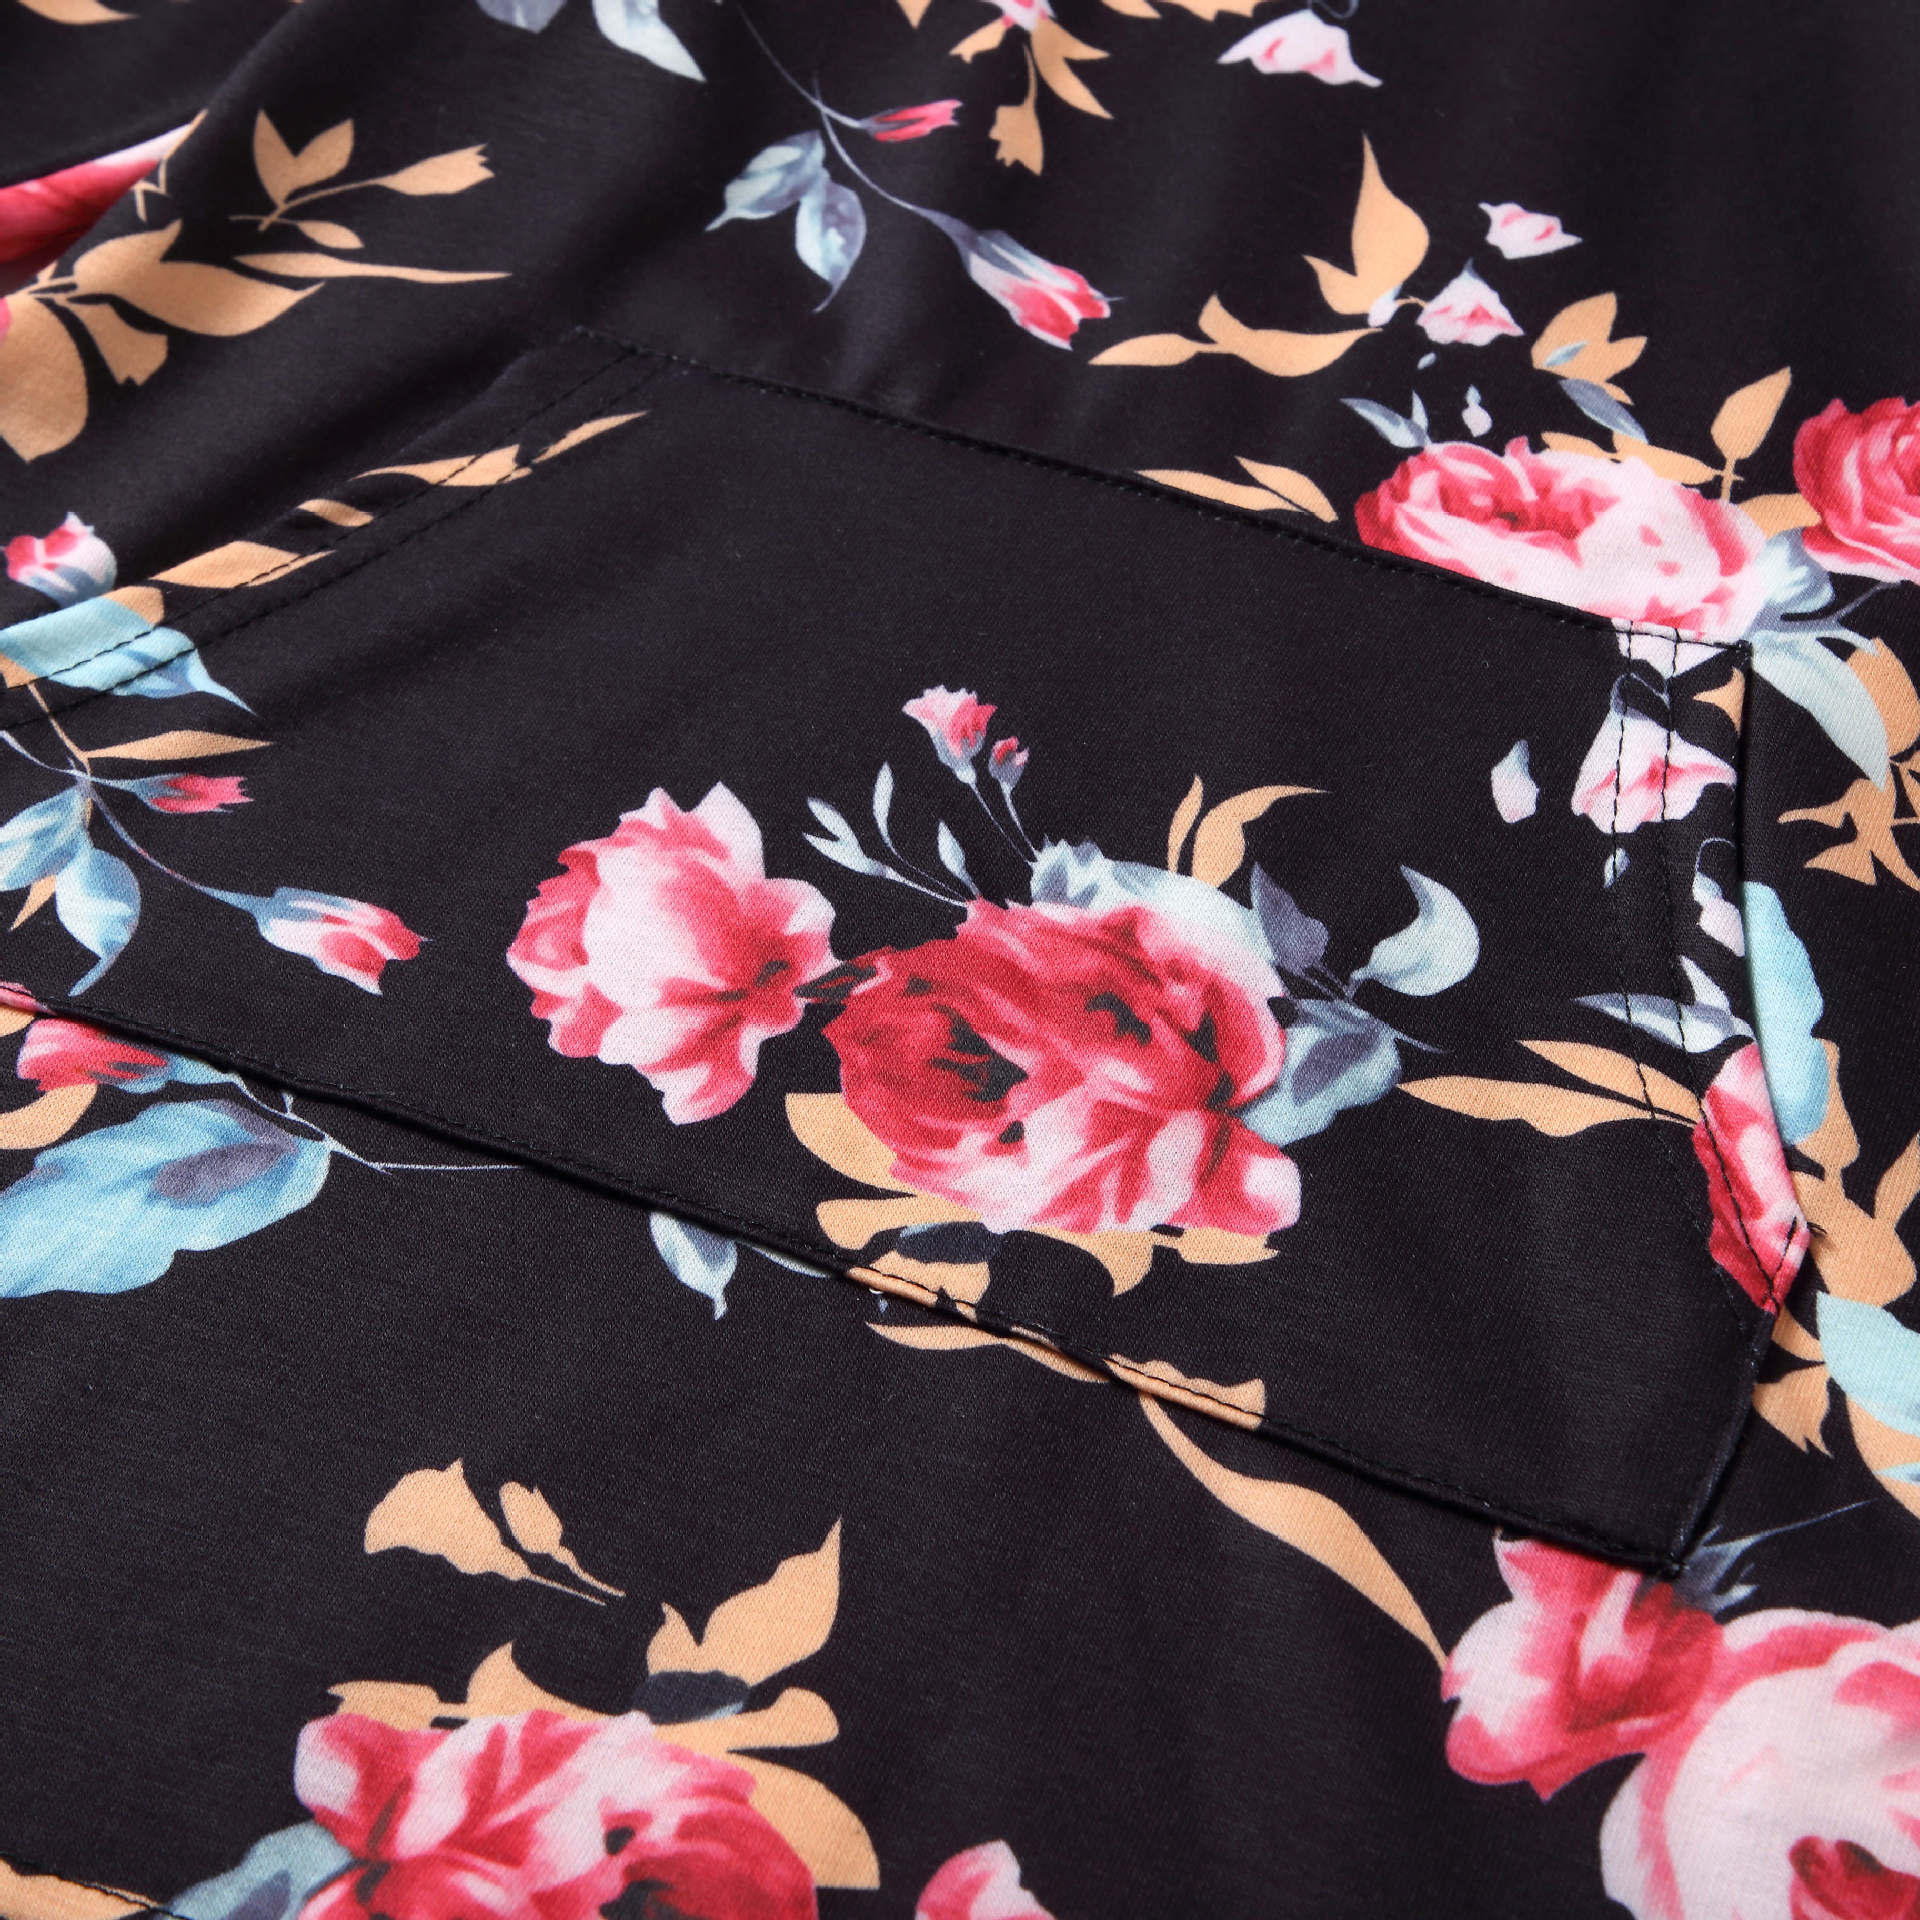 Family Matching Mother-daughter Floral-printed Black Dress